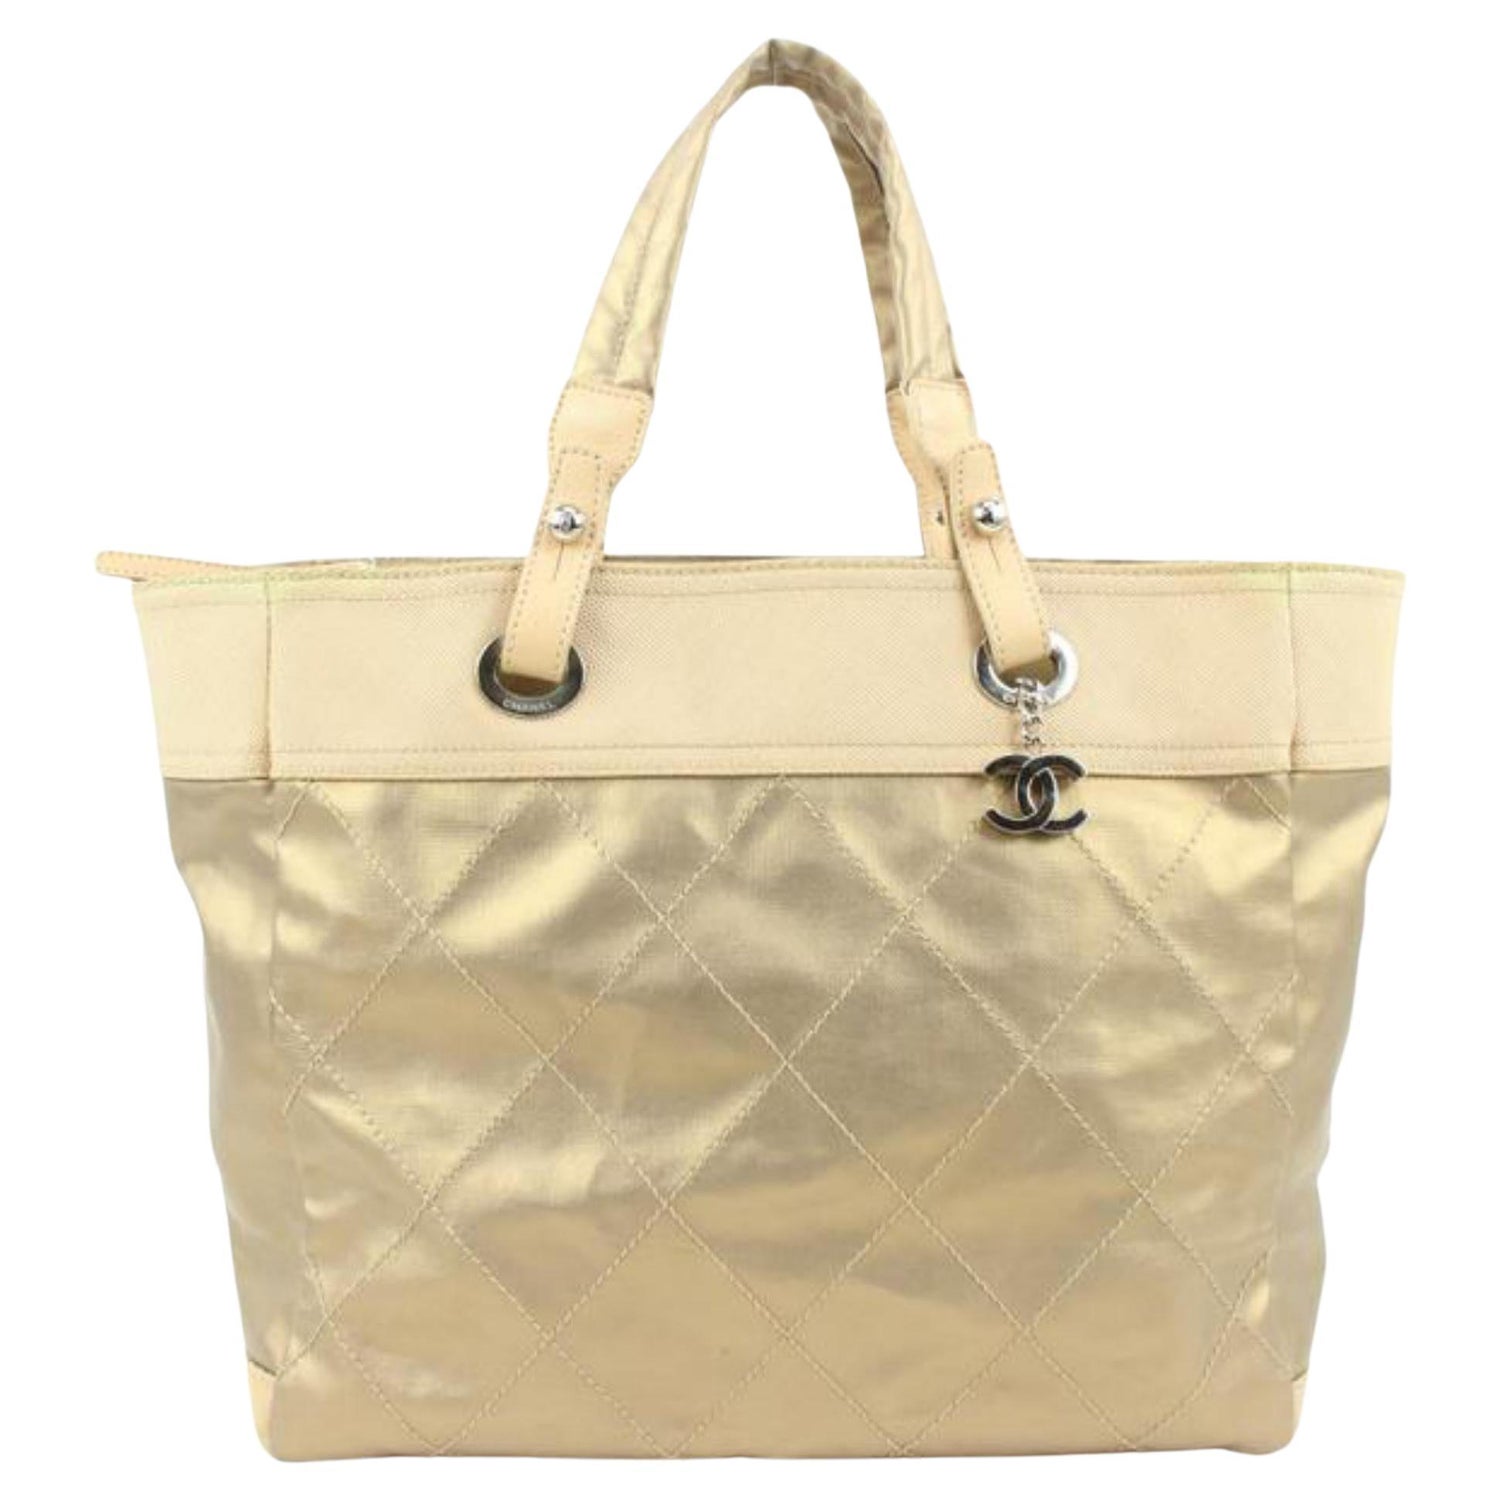 Chanel Quilted Gold Biarritz Shopper Tote Bag 98cas52 For Sale at